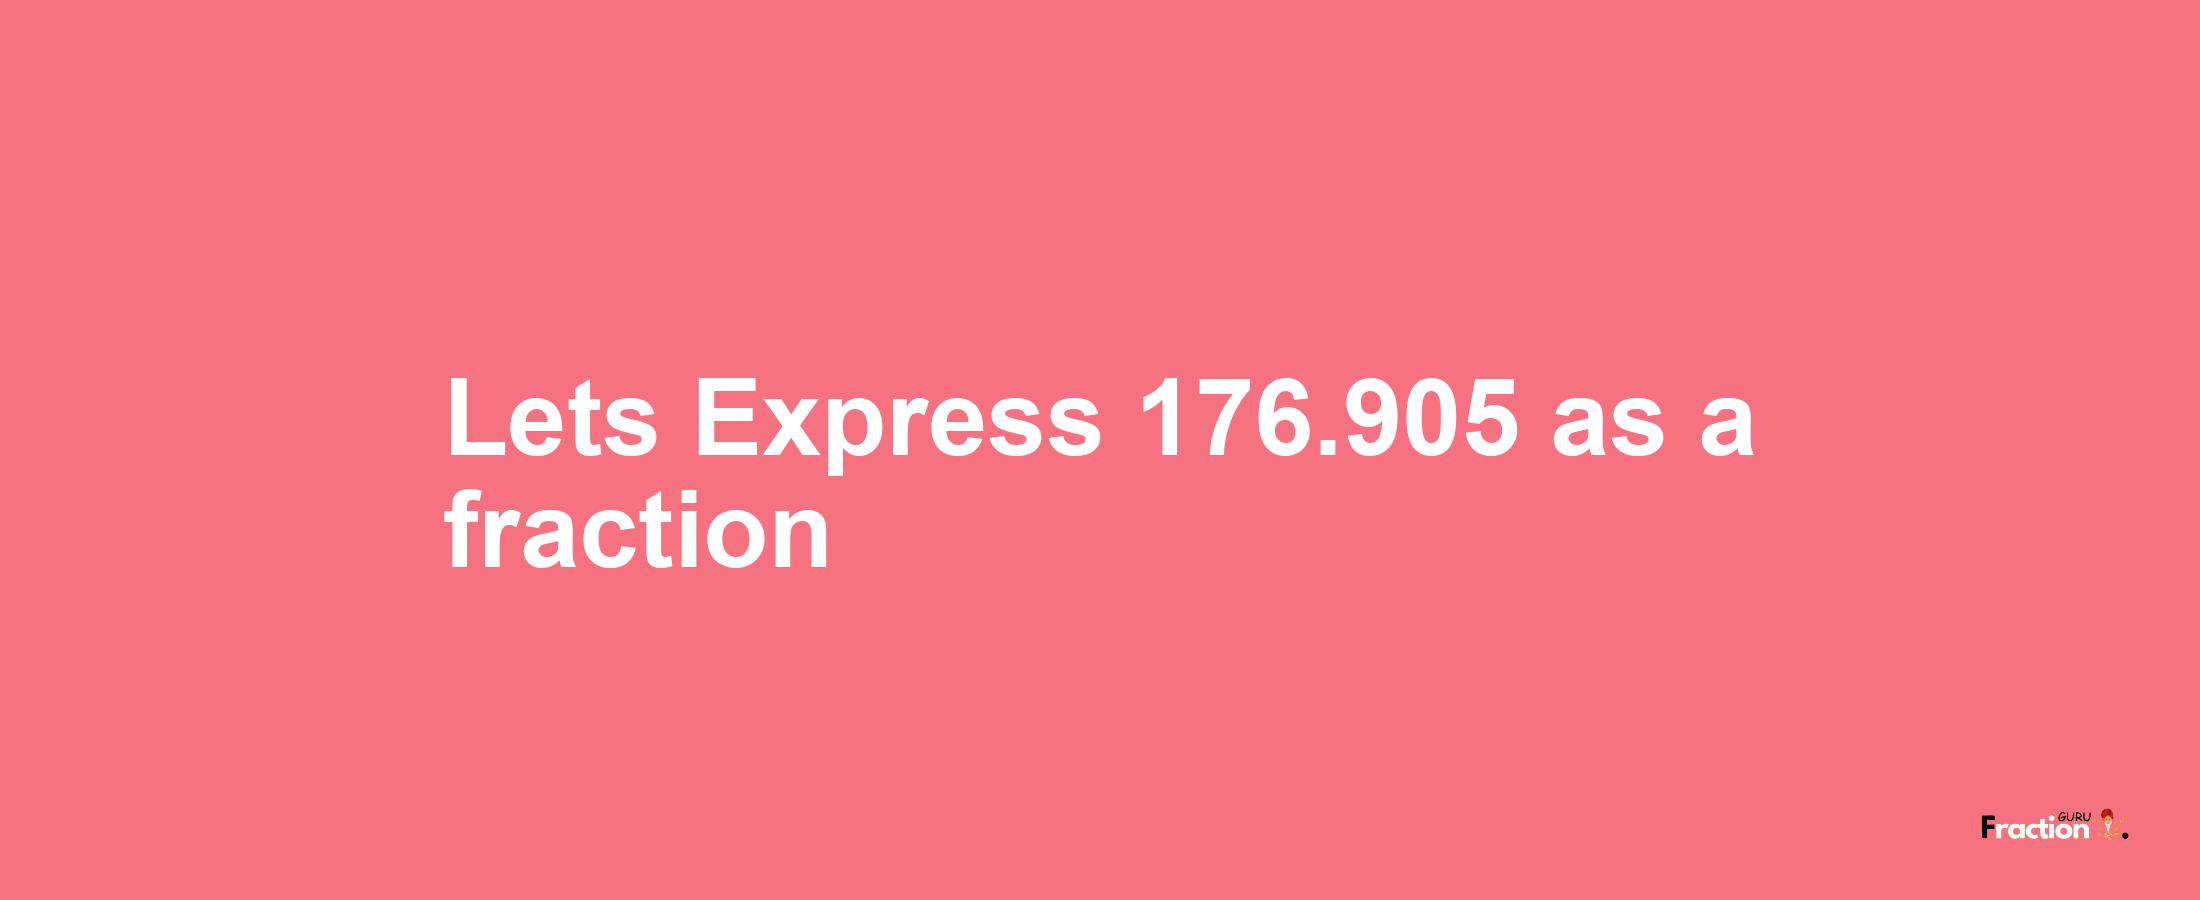 Lets Express 176.905 as afraction